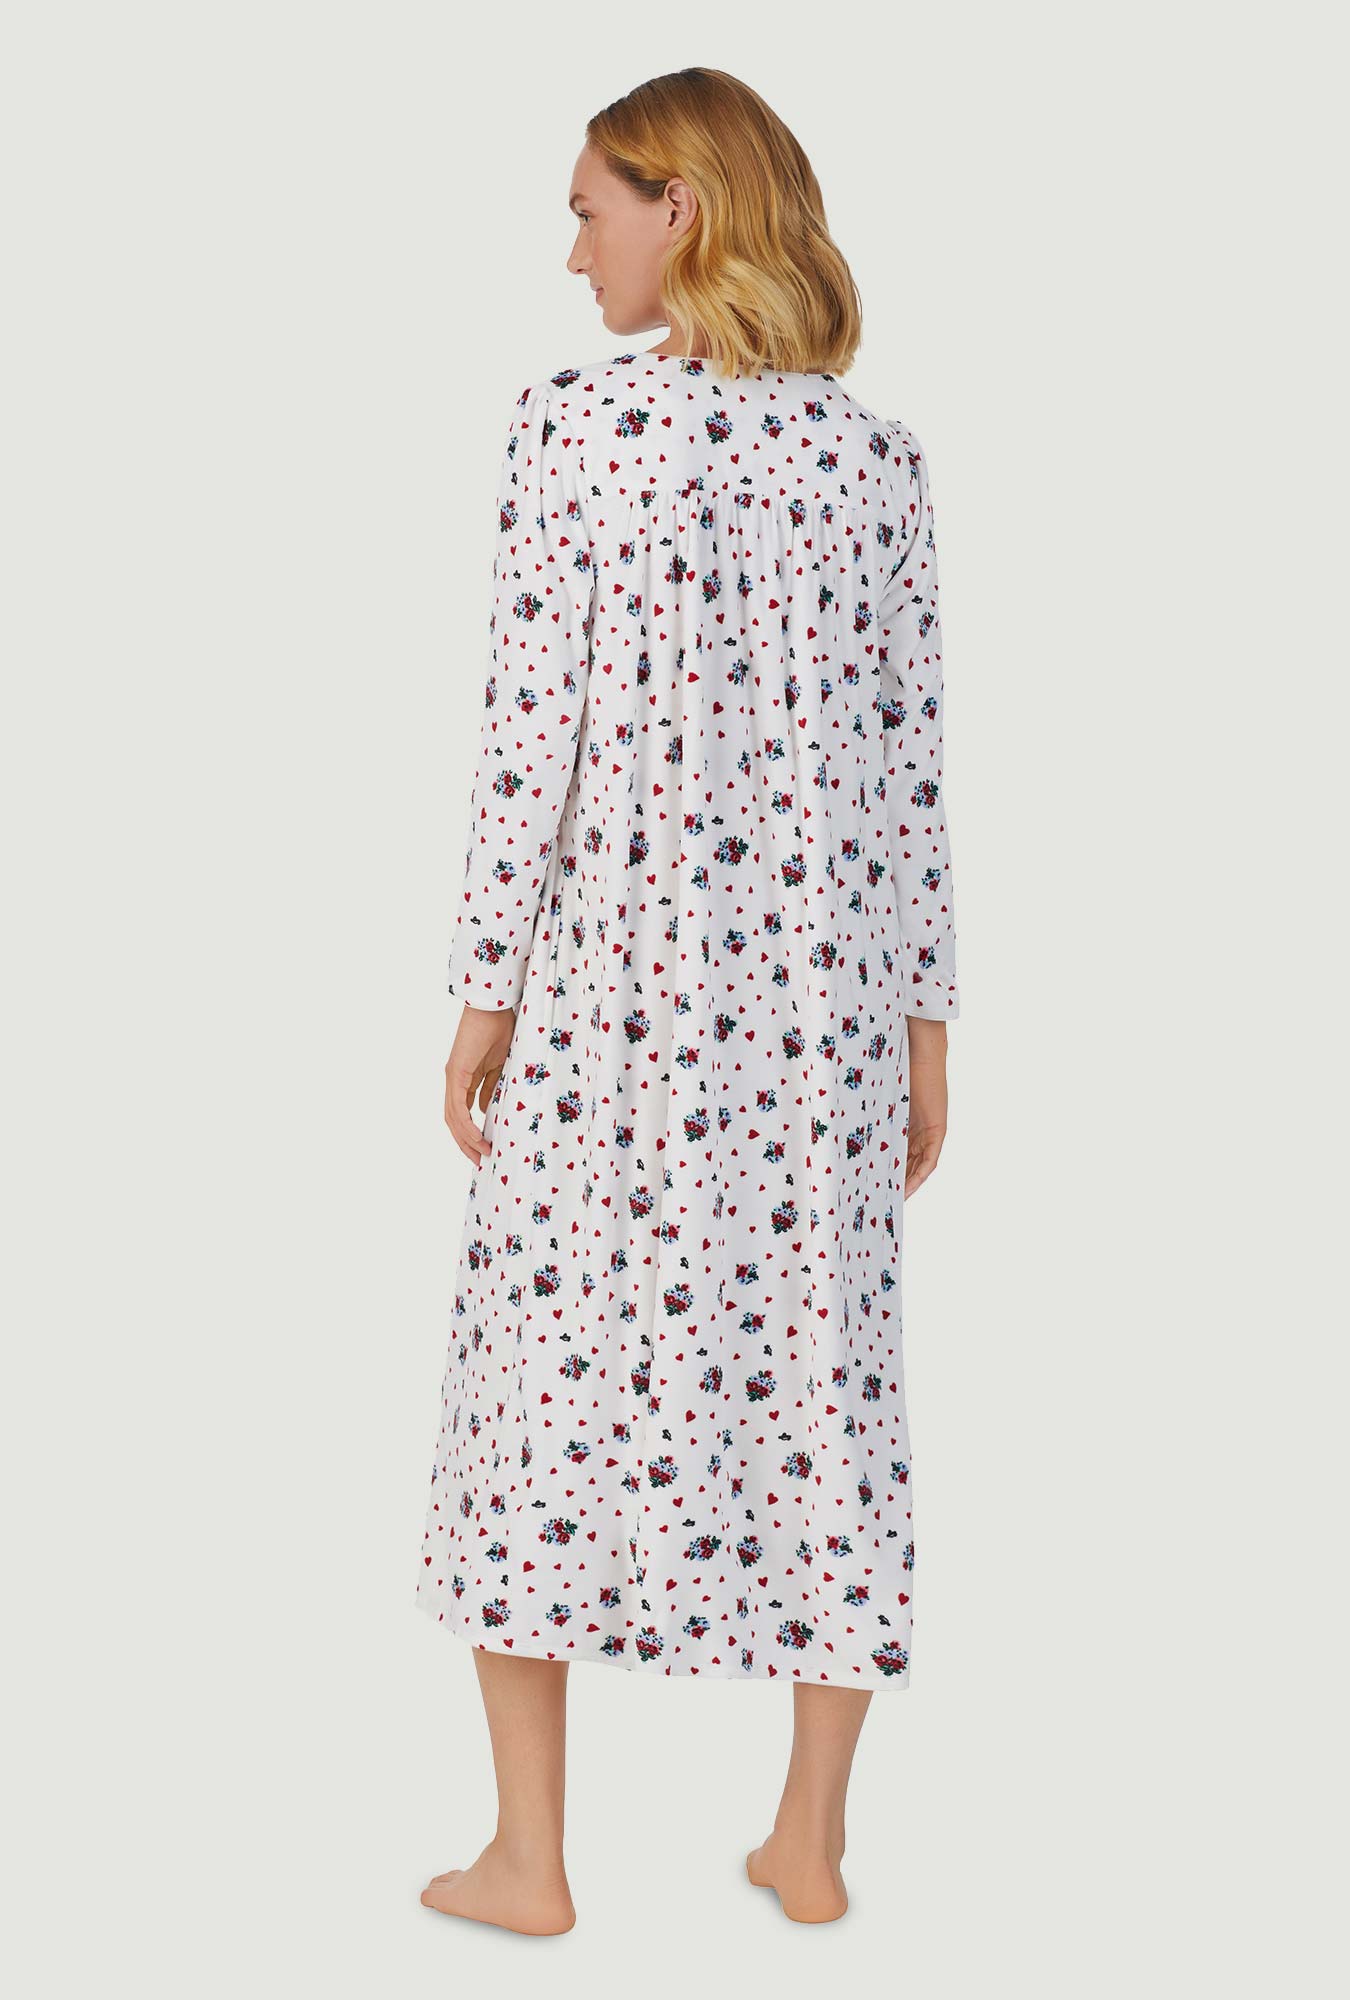 A lady wearing white long sleeve cozy fleece gown with heart floral print.